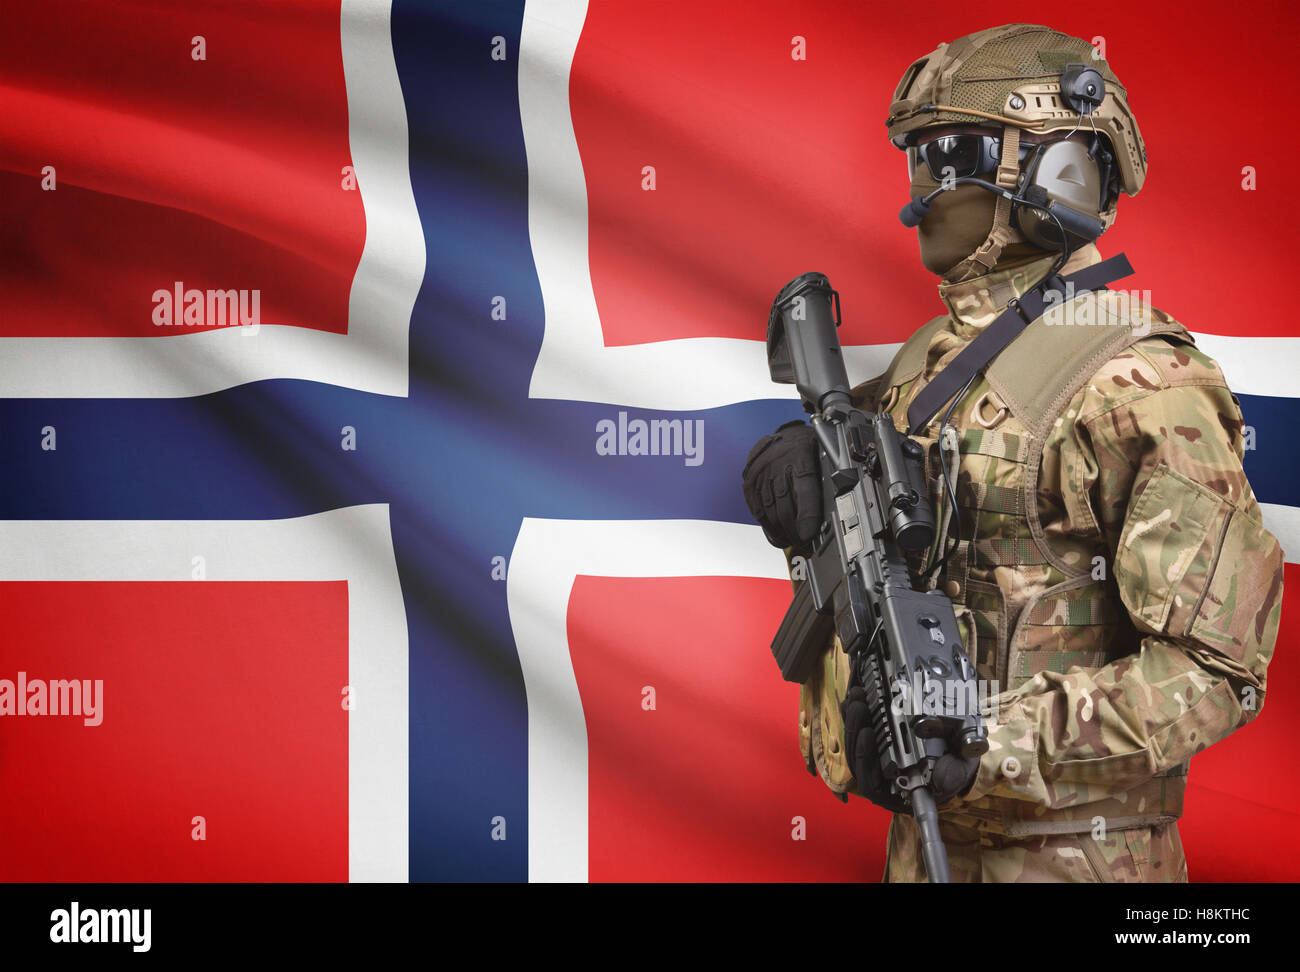 Soldier in helmet holding machine gun with national flag on background - Norway Stock Photo